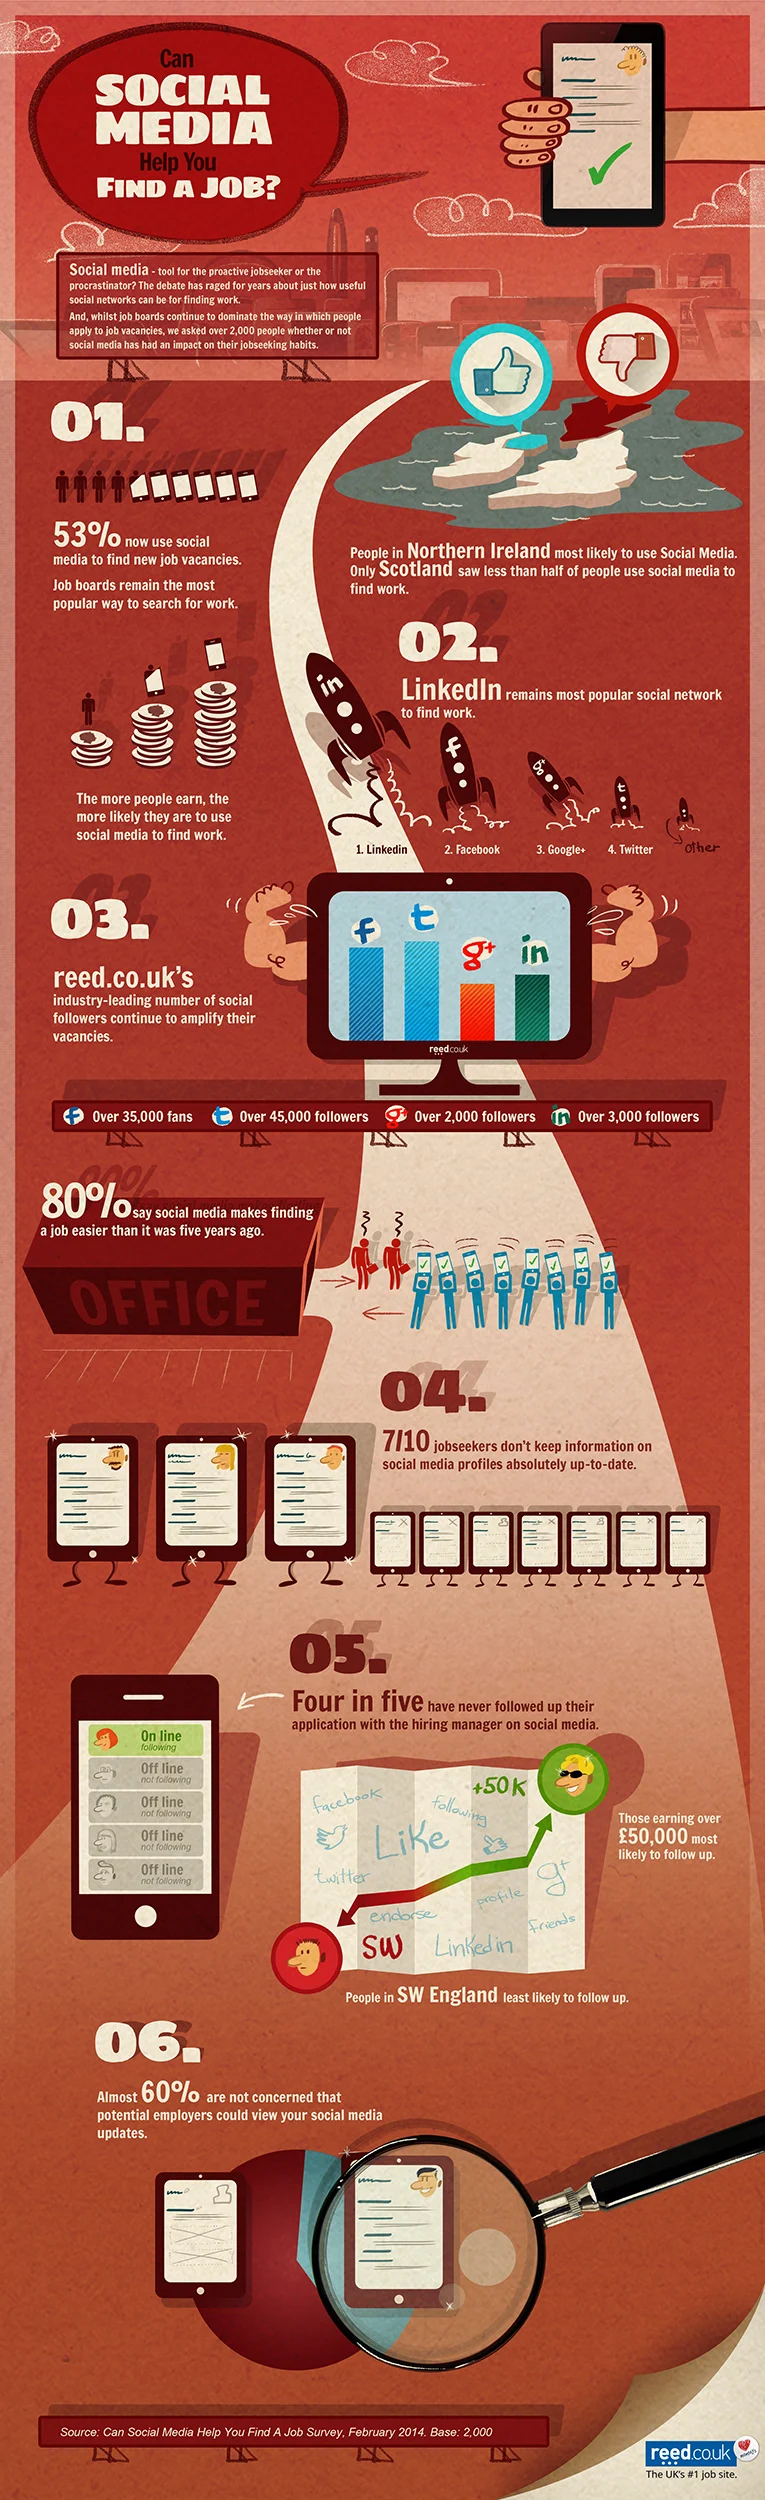 #infographic: How jobseekers use social networks to find work